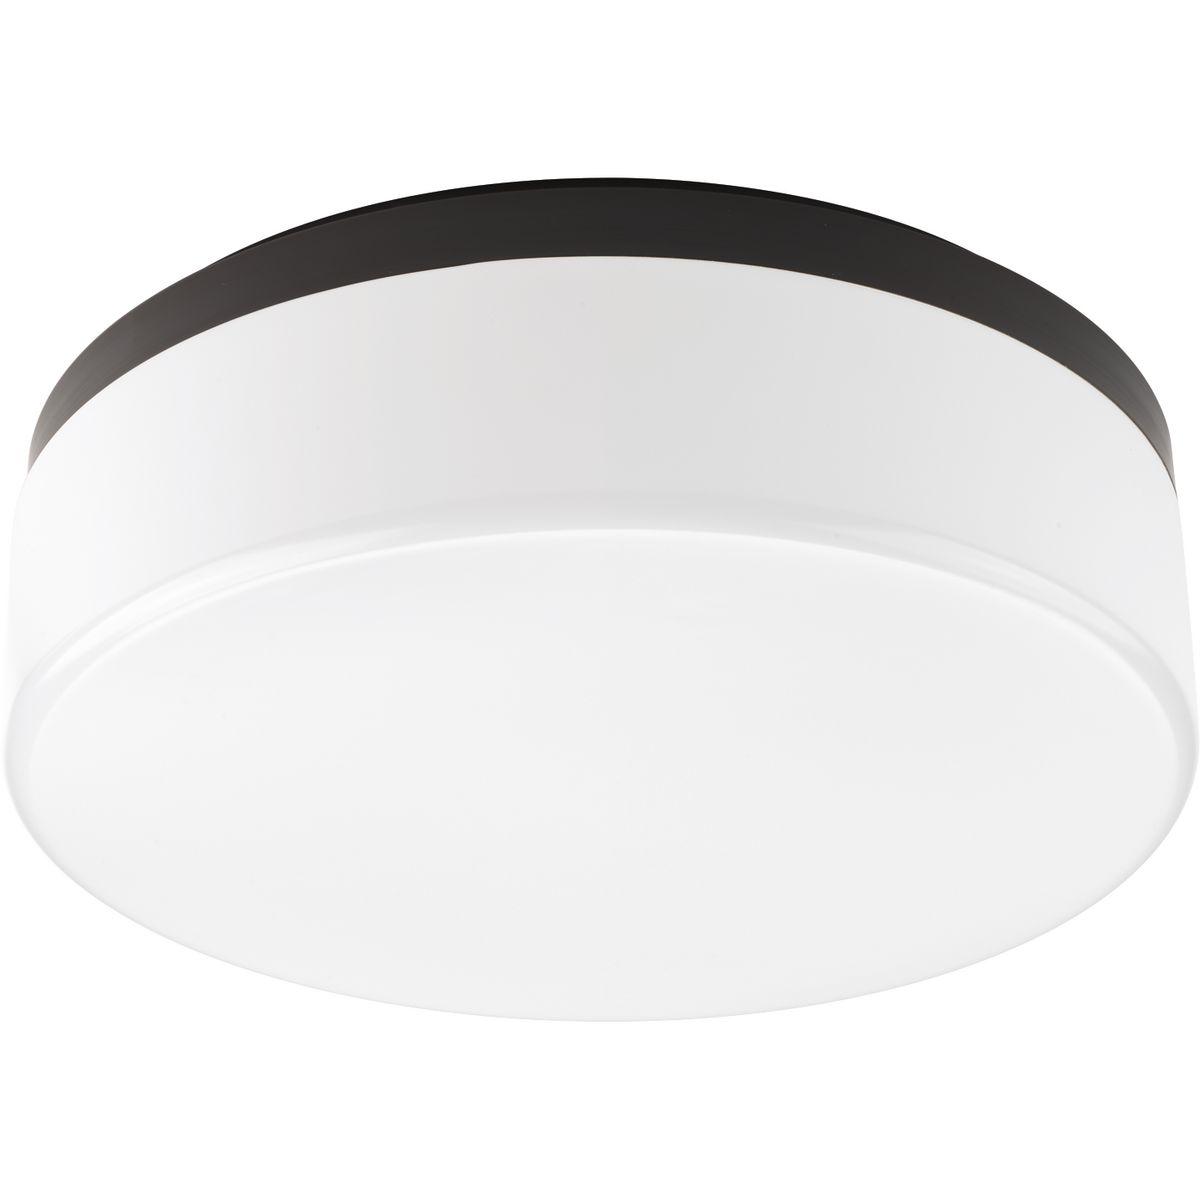 Hubbell P350077-020-30 14" LED flush mount with etched white opal acrylic diffuser with a clean modern look. 3000K color temperature and 90+ CRI. Acrylic bowl is attached with a twist and lock action for ease of installation. This fixture can be mounted on ceiling or wall. ENER